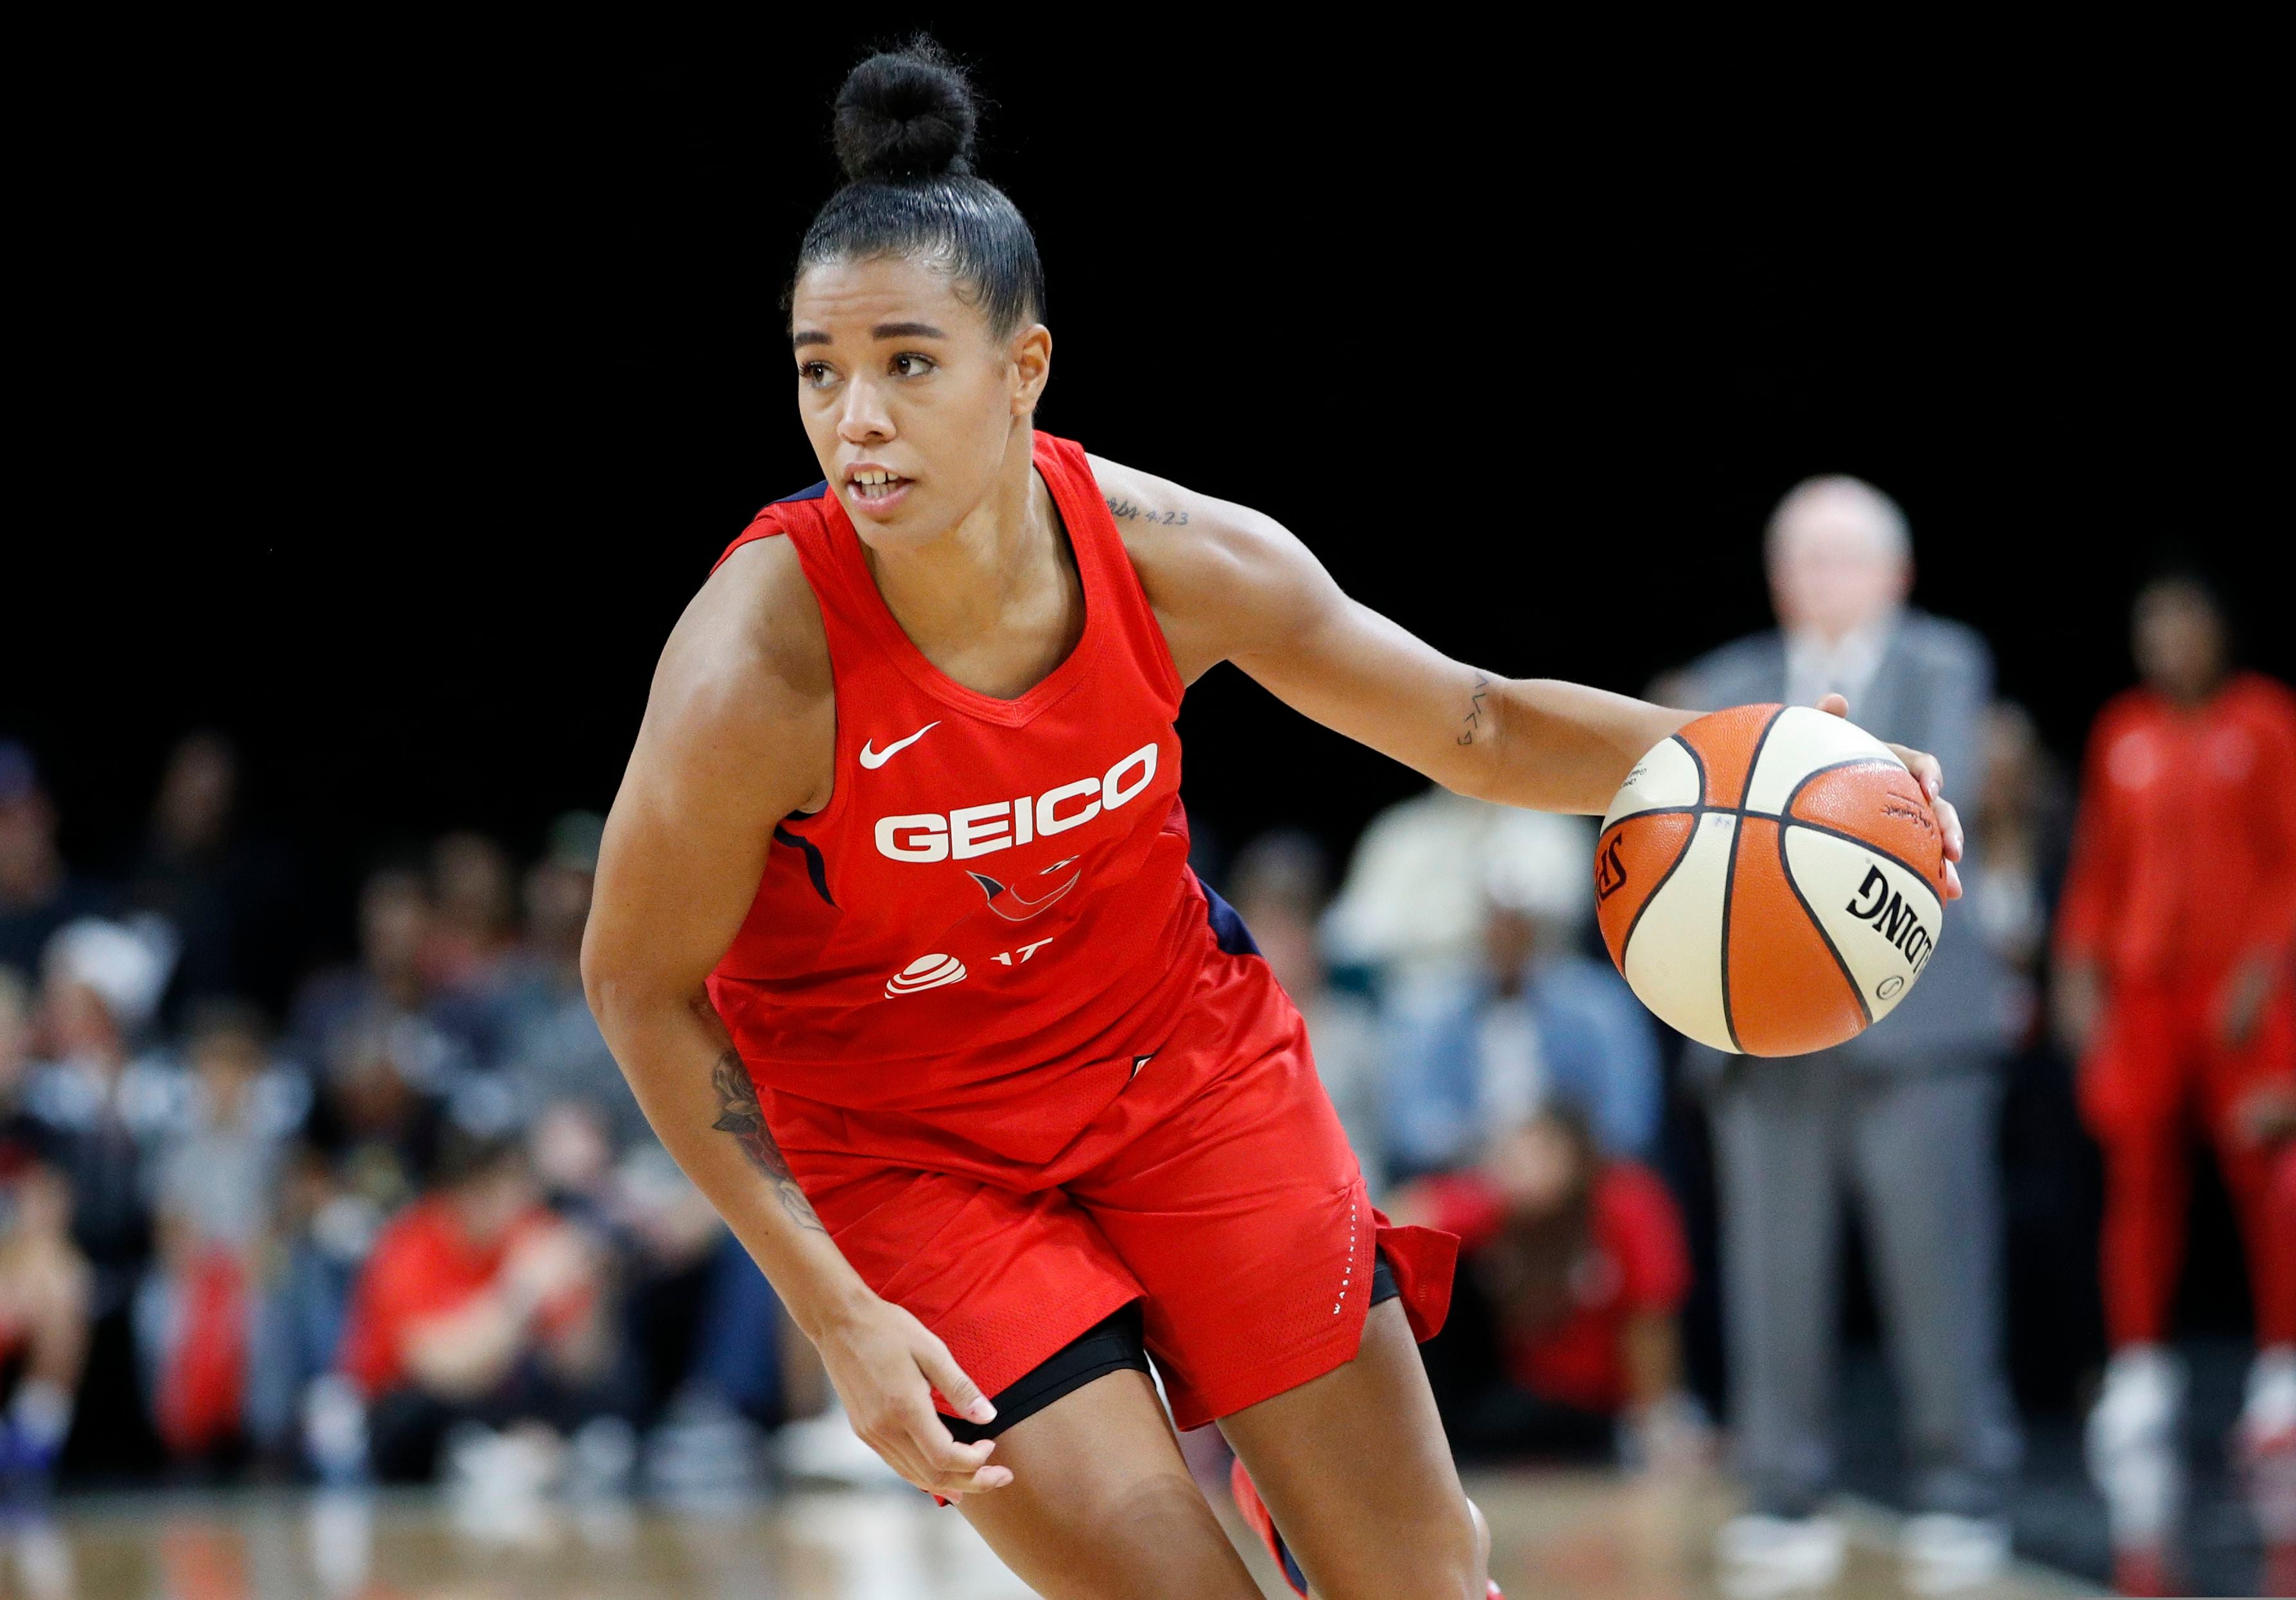 From North Philly to the WNBA! Kahleah Copper is gifted with a